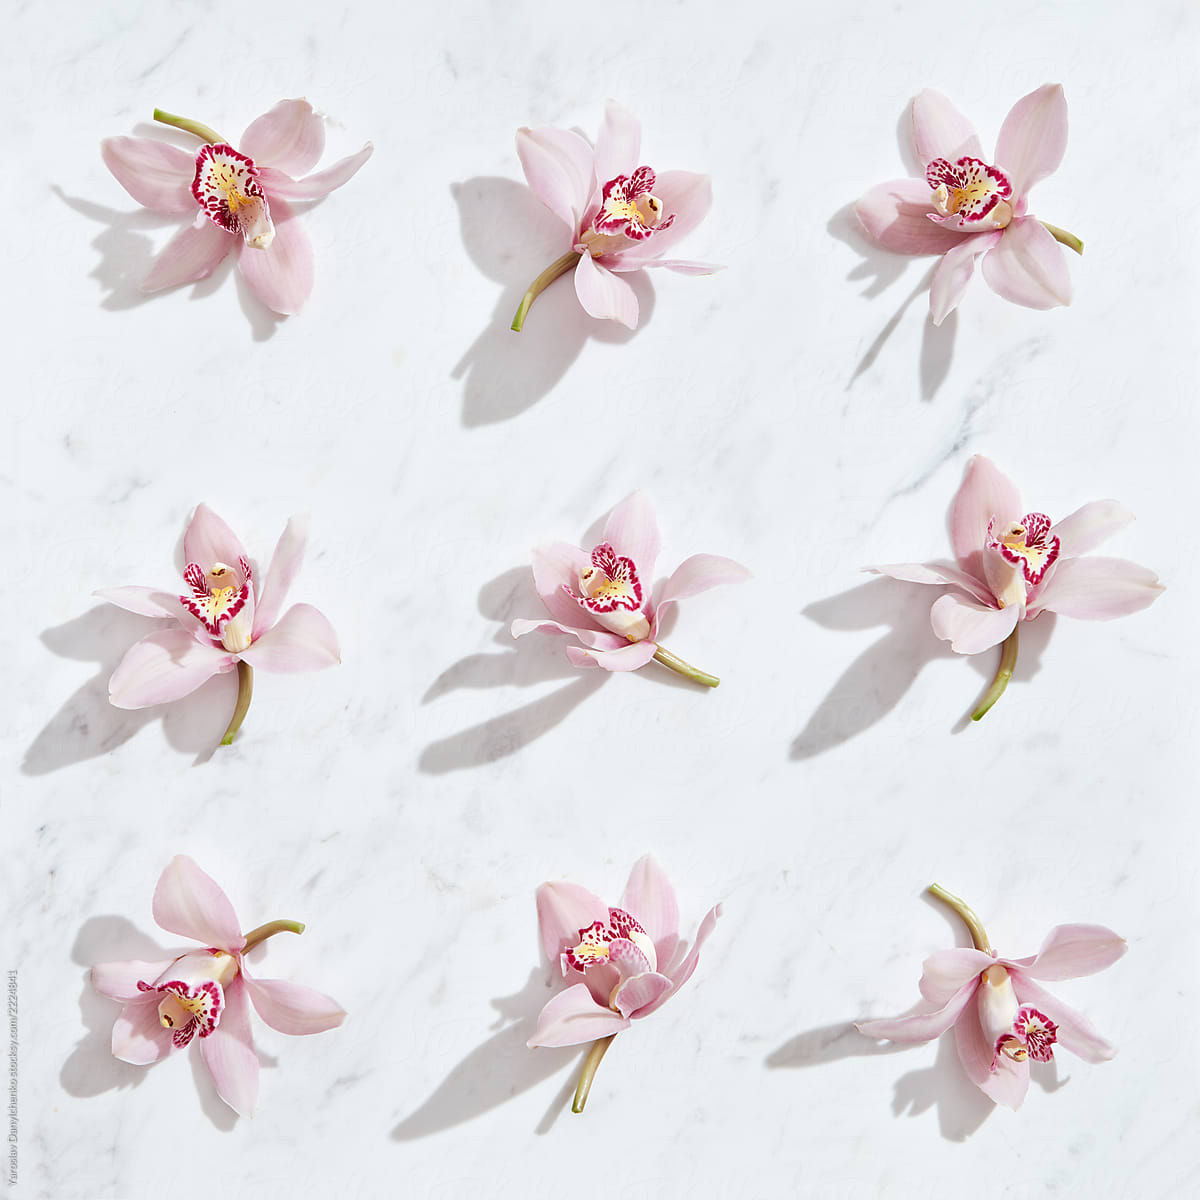 Tender pink orchids flowers pattern on a gray marble background with shadows. Top view.